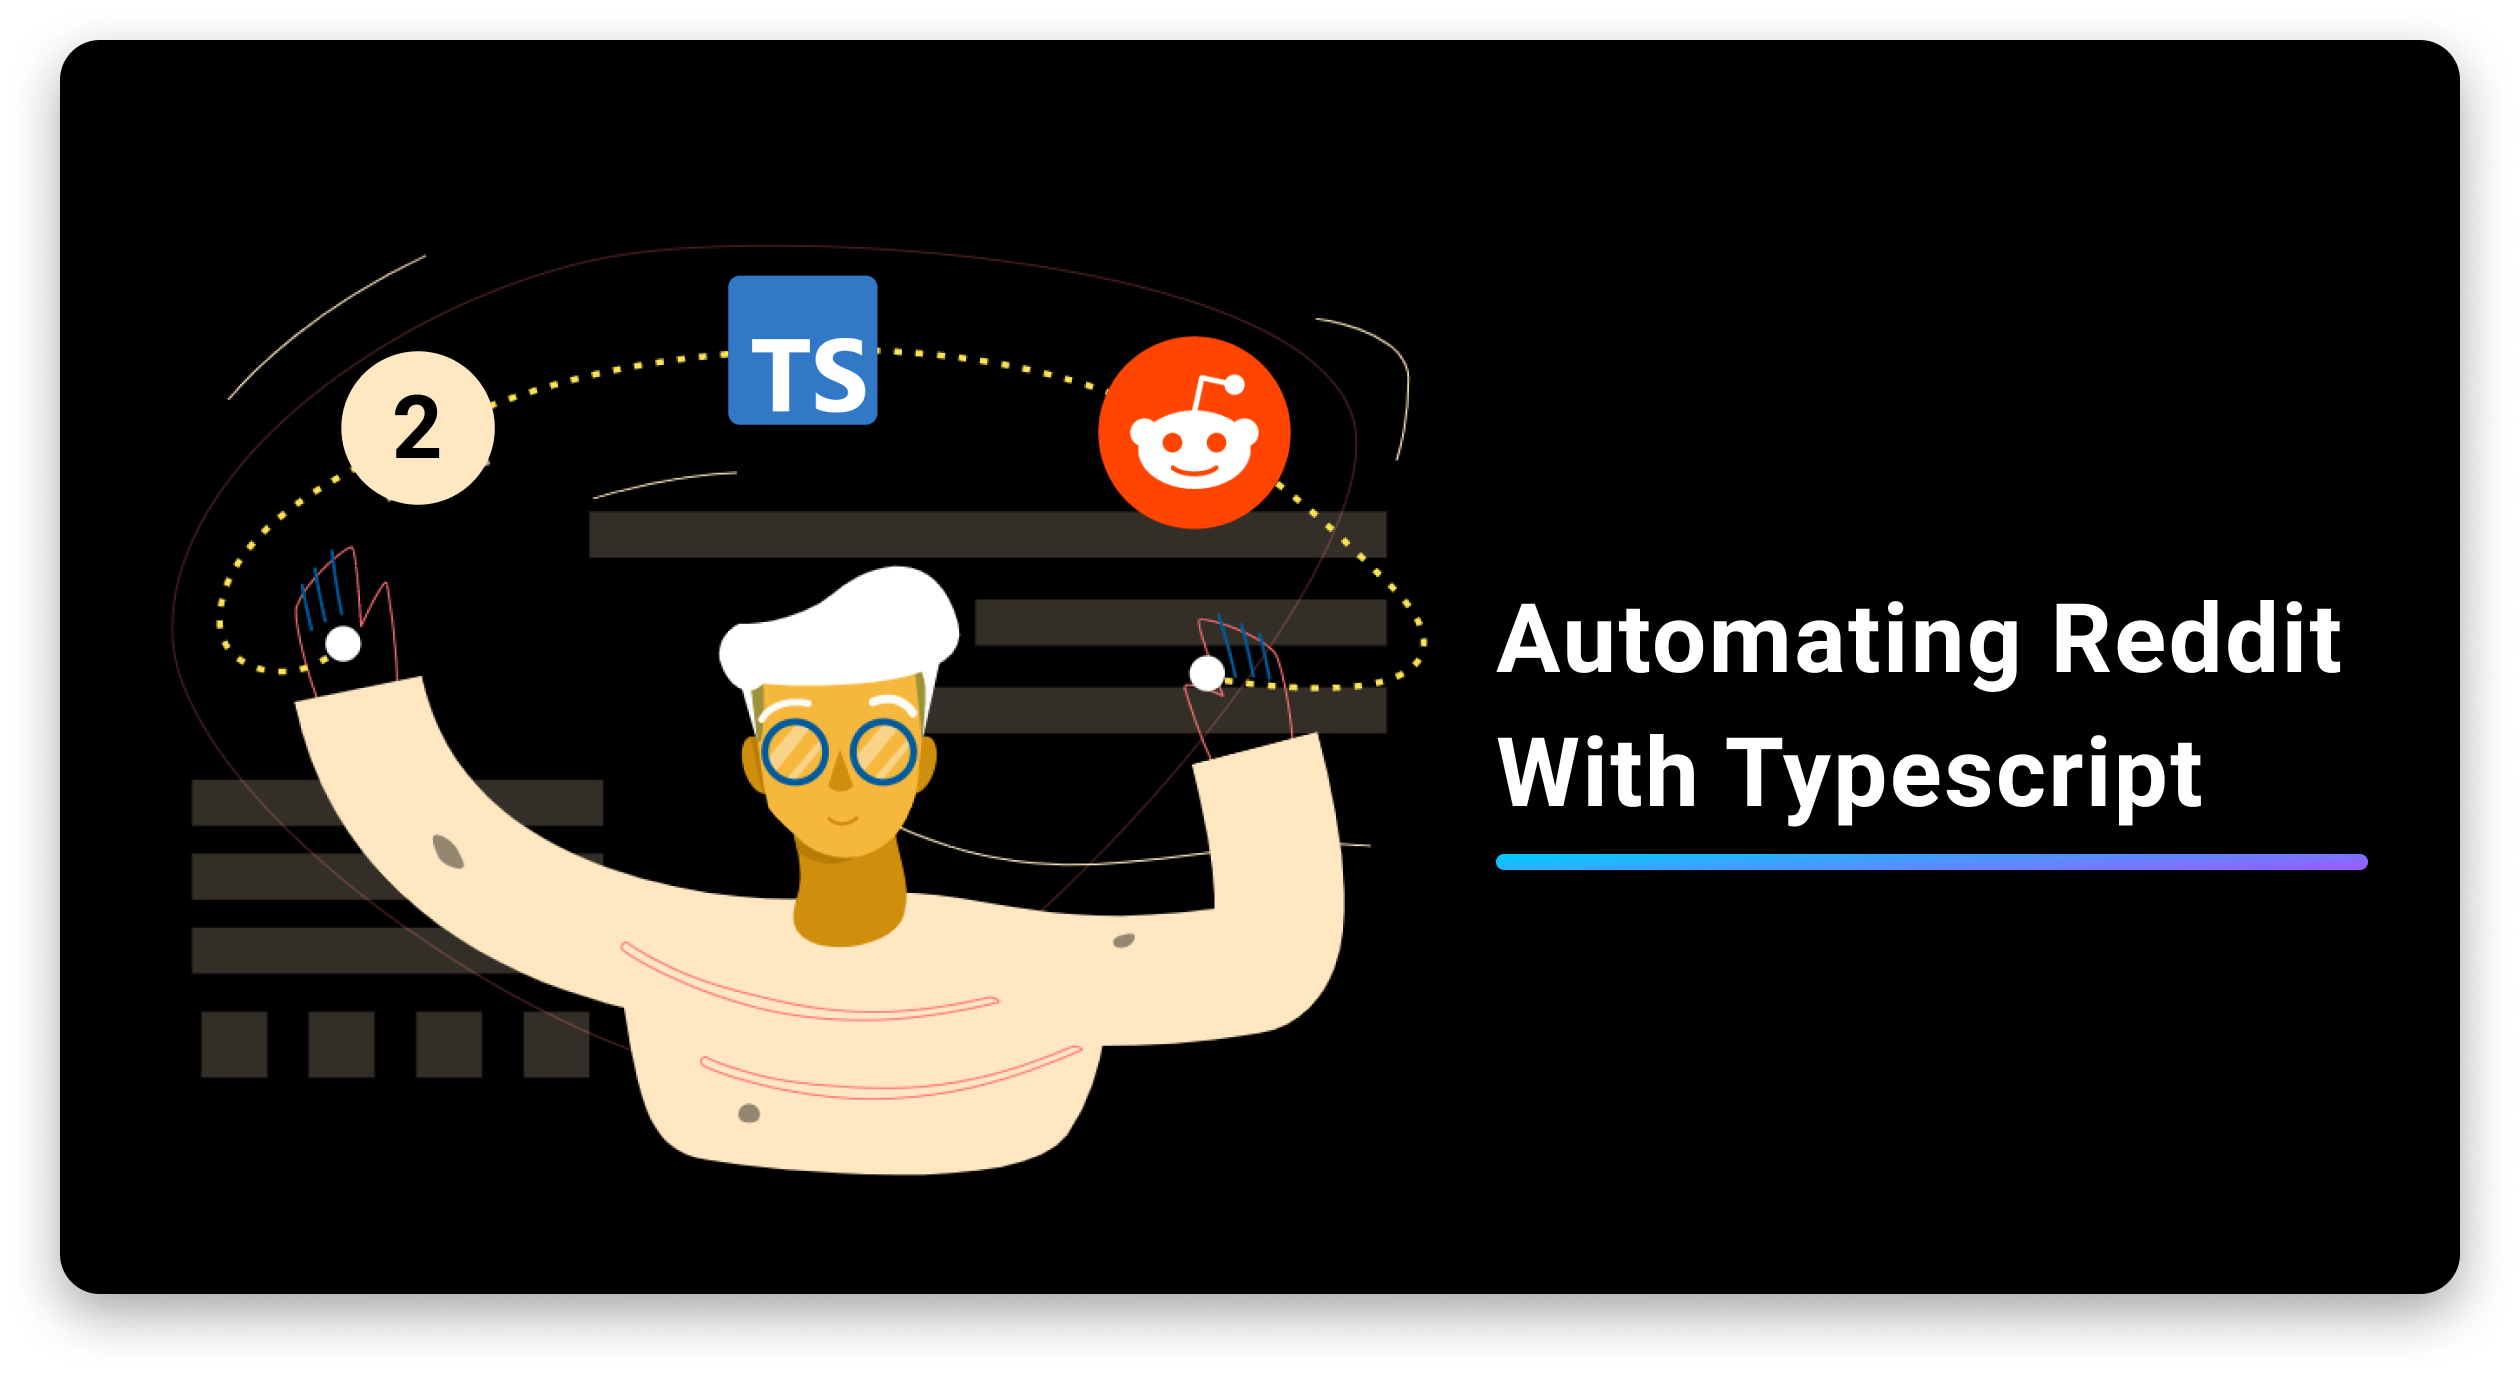 Illustration of a man with a baret waving his hands with Reddit and Typescript logos above him